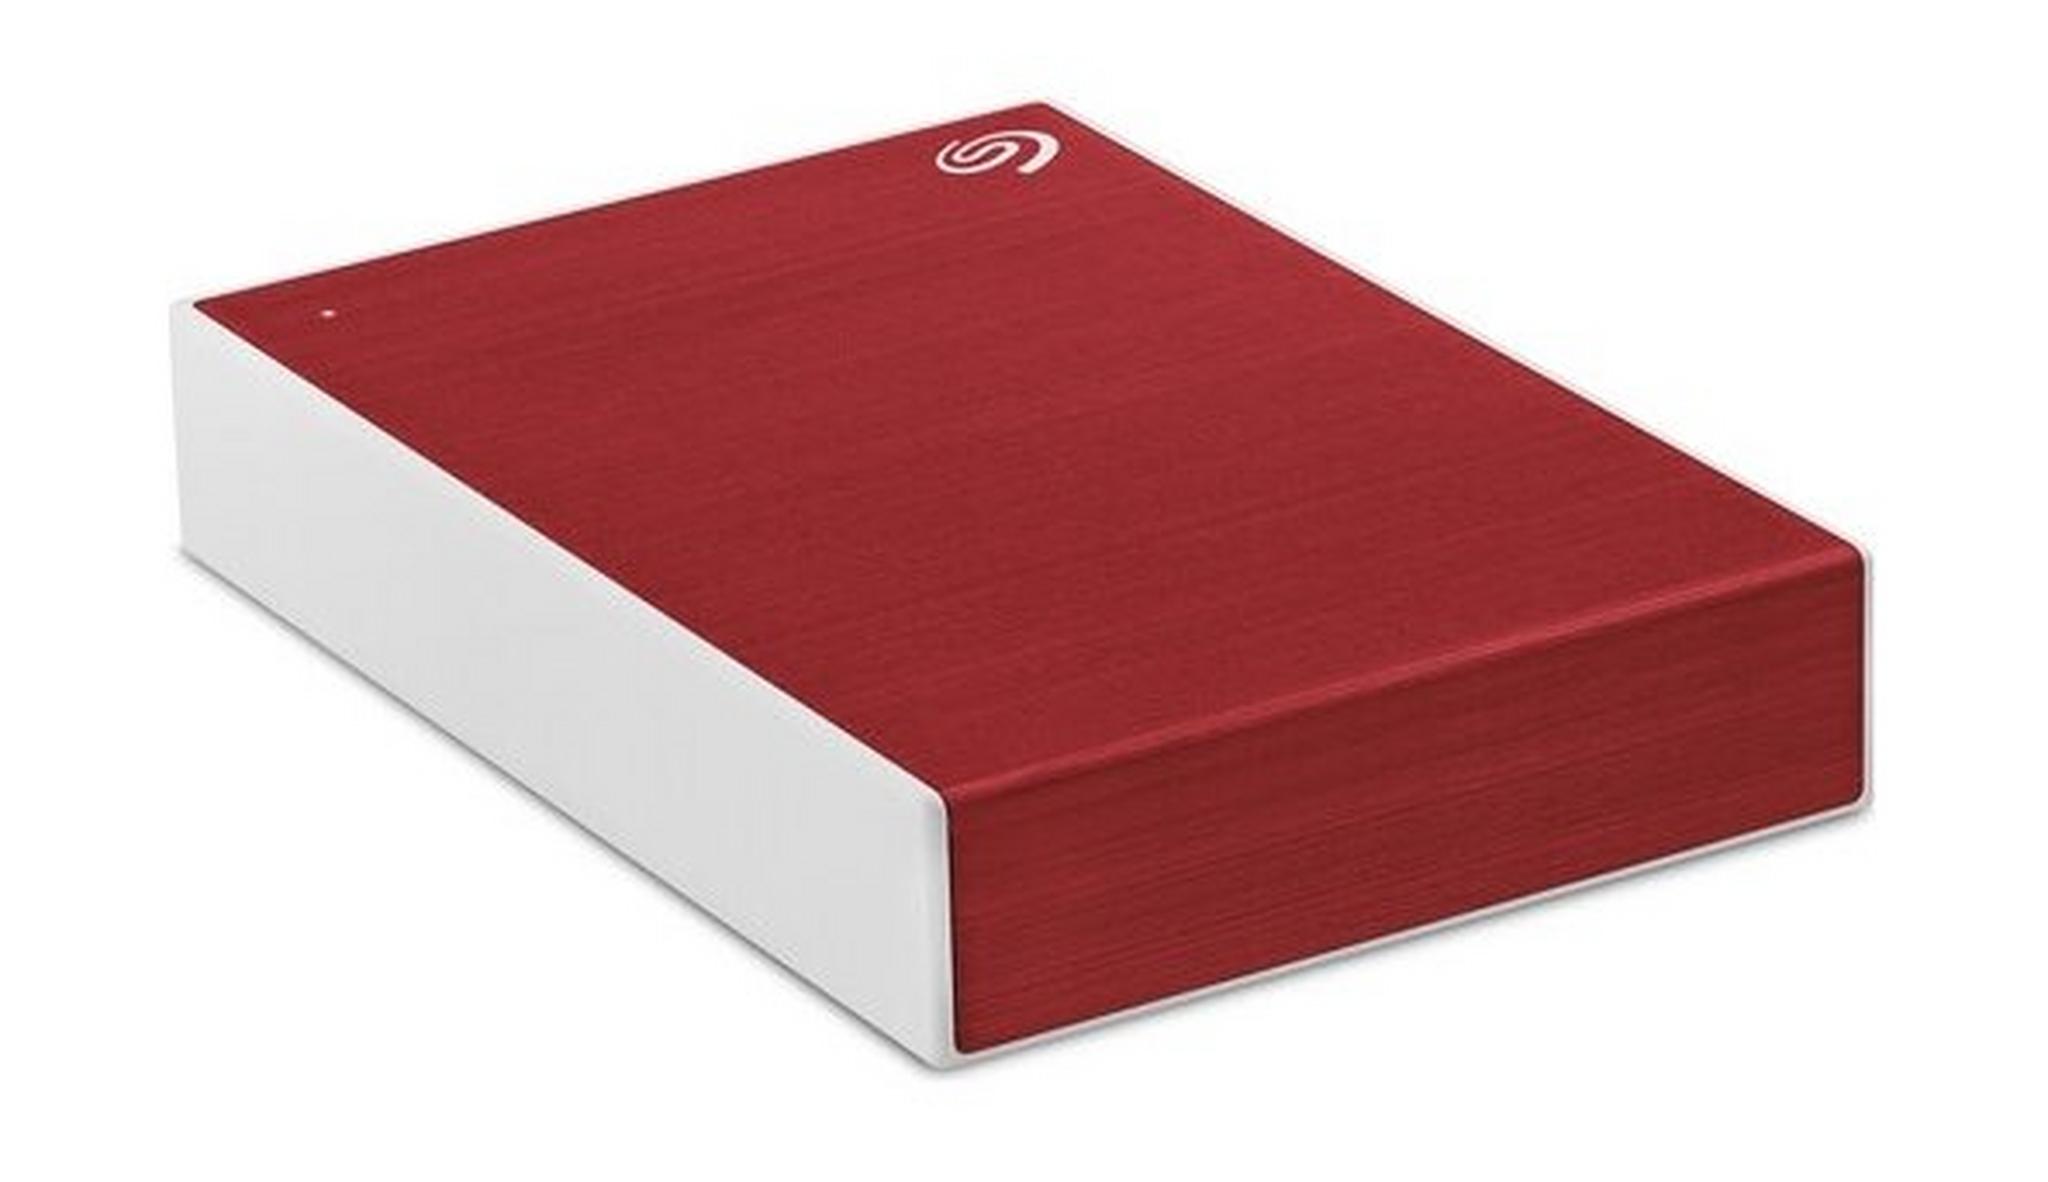 Seagate One Touch 5TB USB 3.2 Gen 1 External Hard Drive - Red